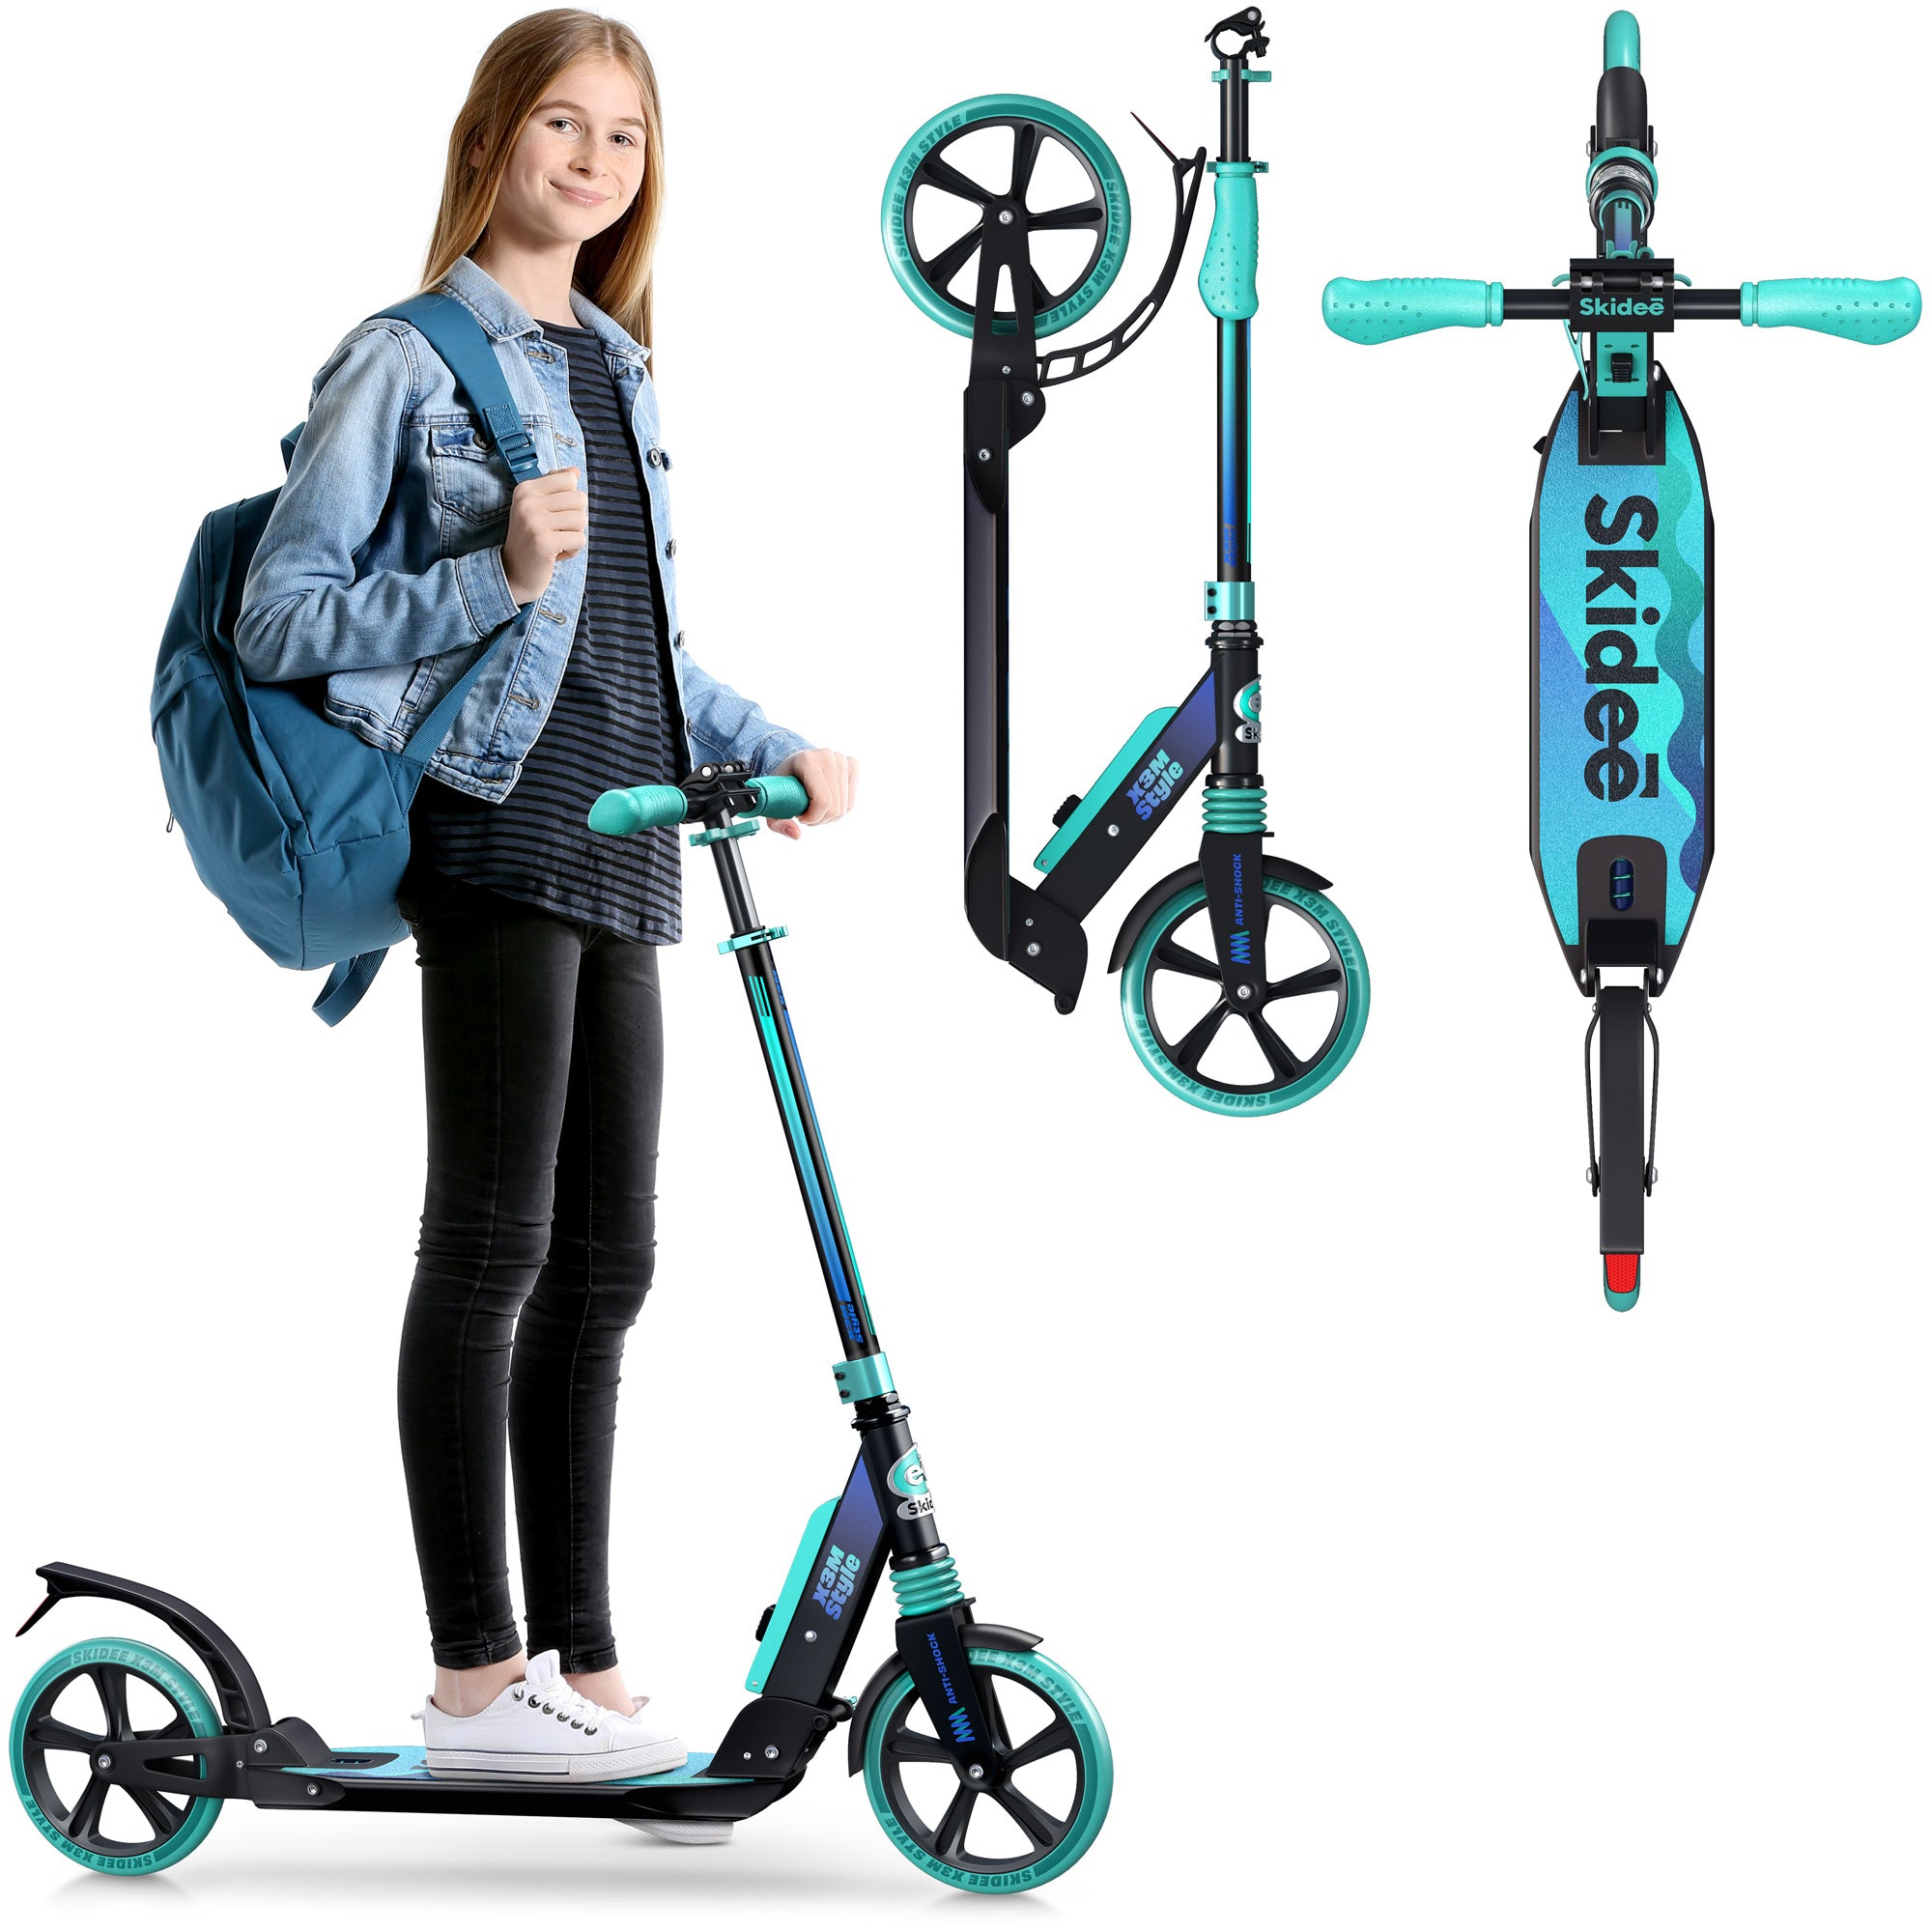 X3M Scooter for Kids Ages 6-12 - Scooters for Teens 12 Years and Up 